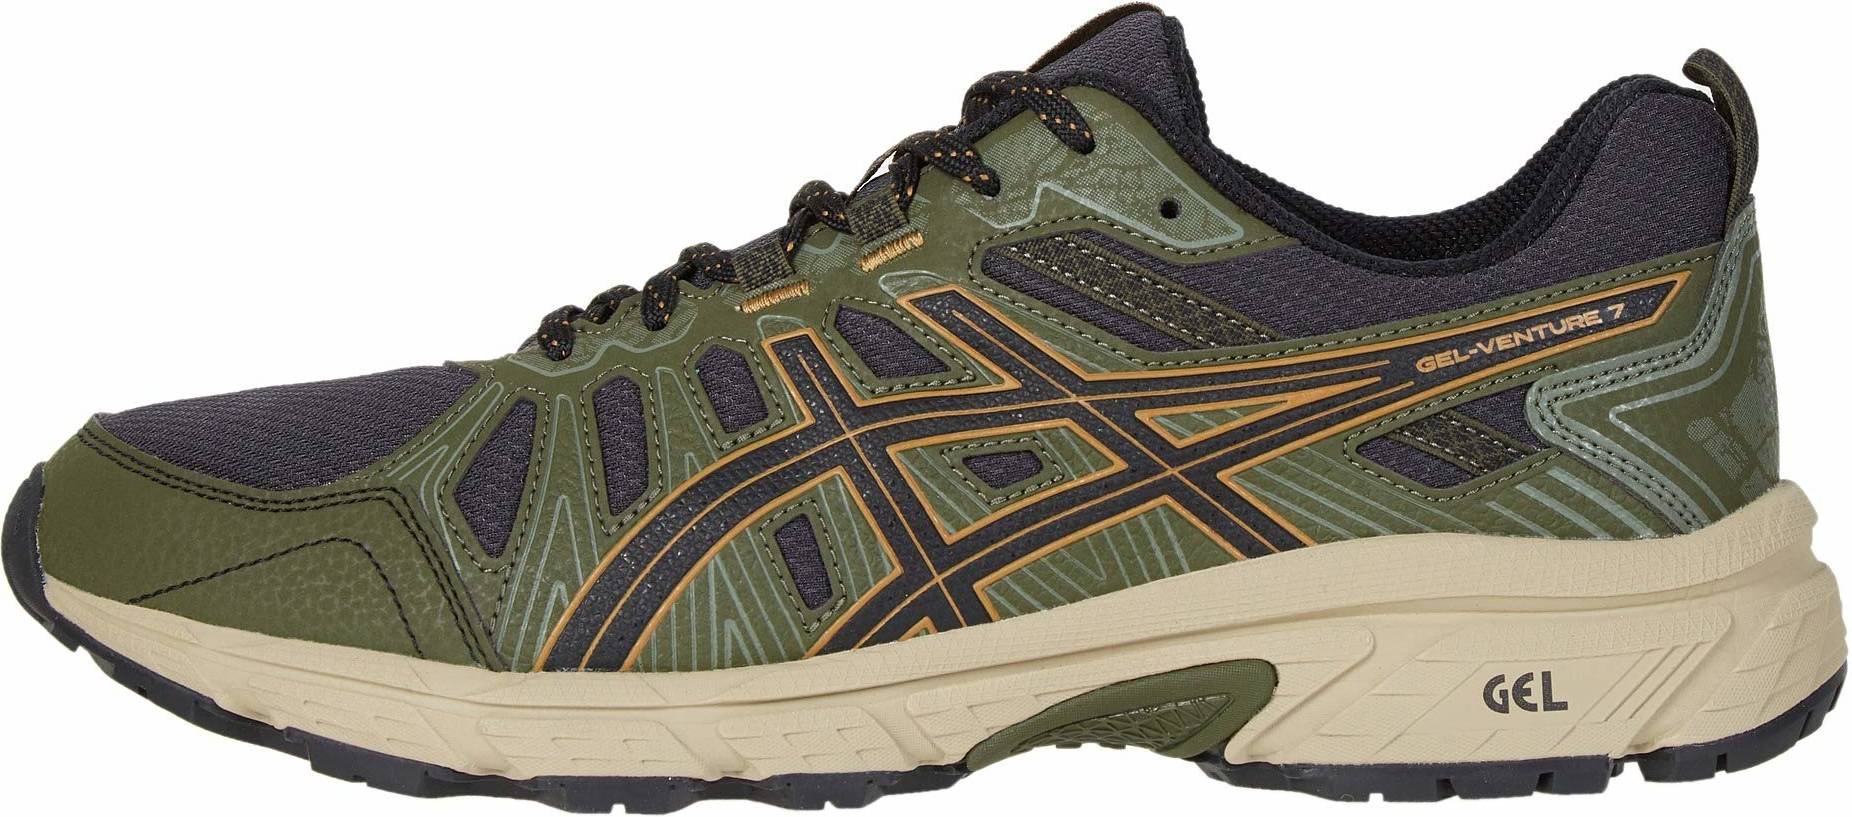 Save 35% on Trail Cheap Running Shoes 